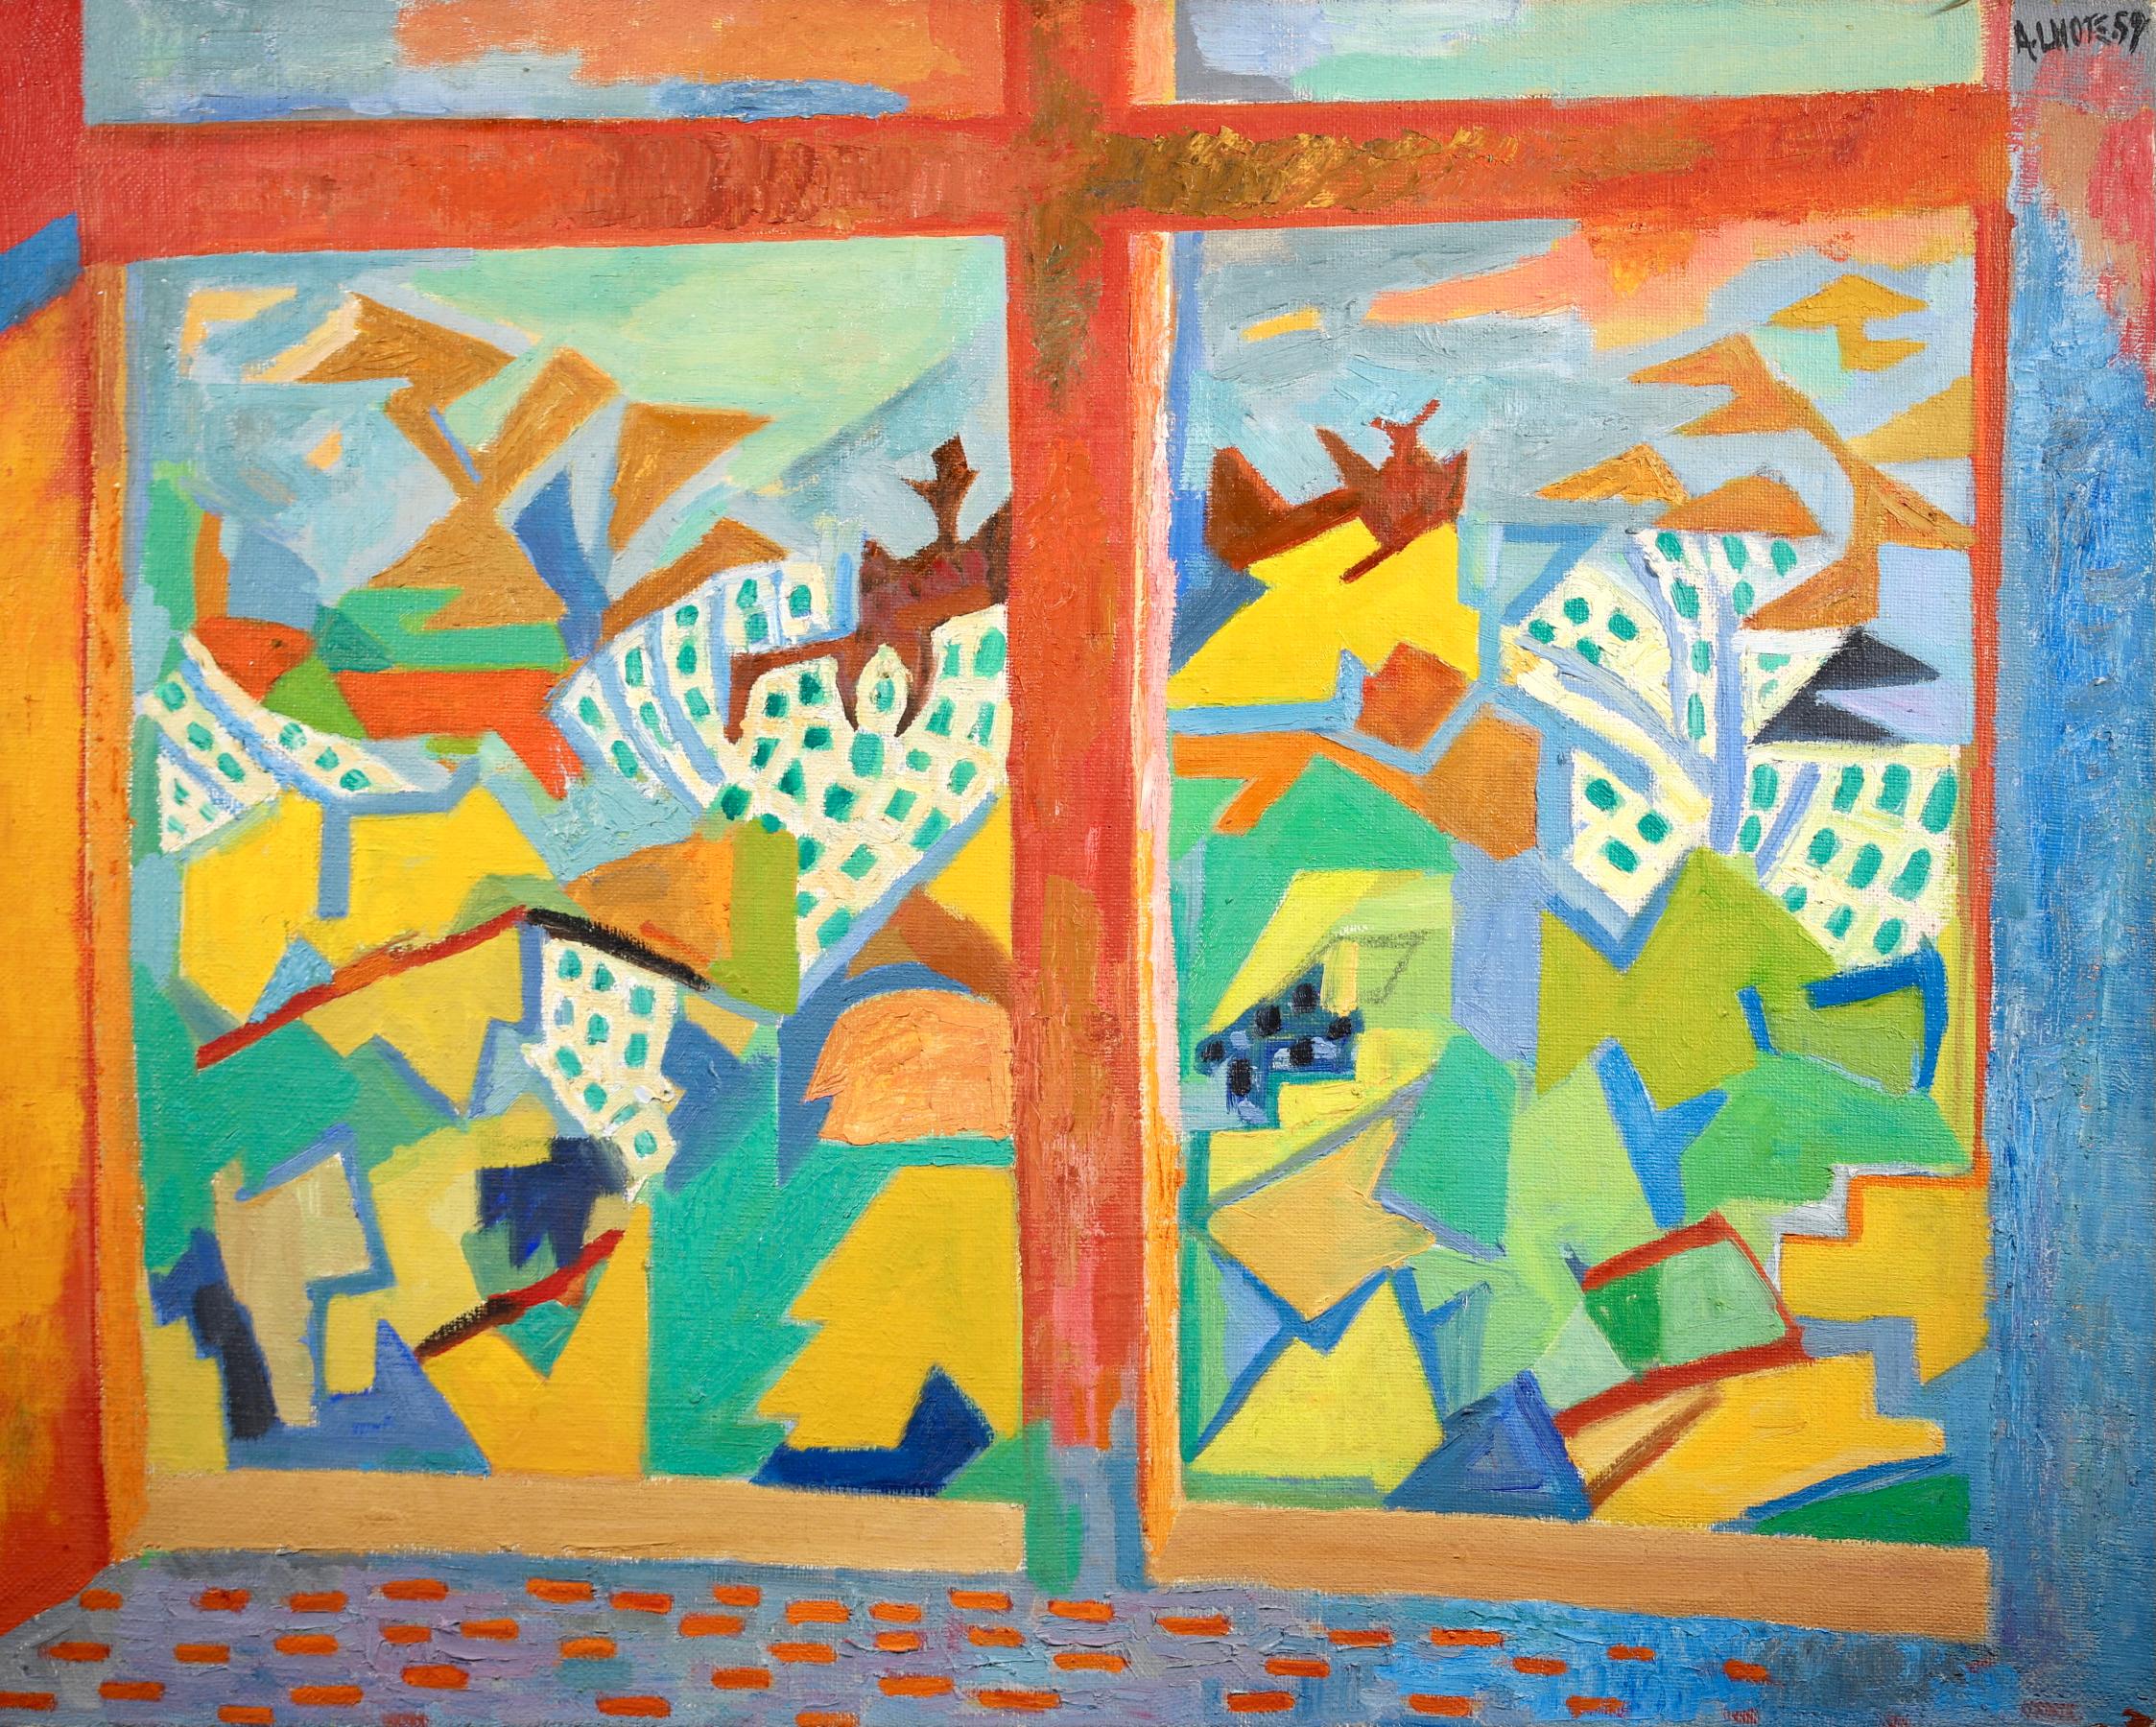 Signed and dated oil on canvas landscape by French cubist painter André Lhote. The piece depicts a view of a mountainous landscape from a Mullion window - a decorative with a vertical element which forms a division between the units of